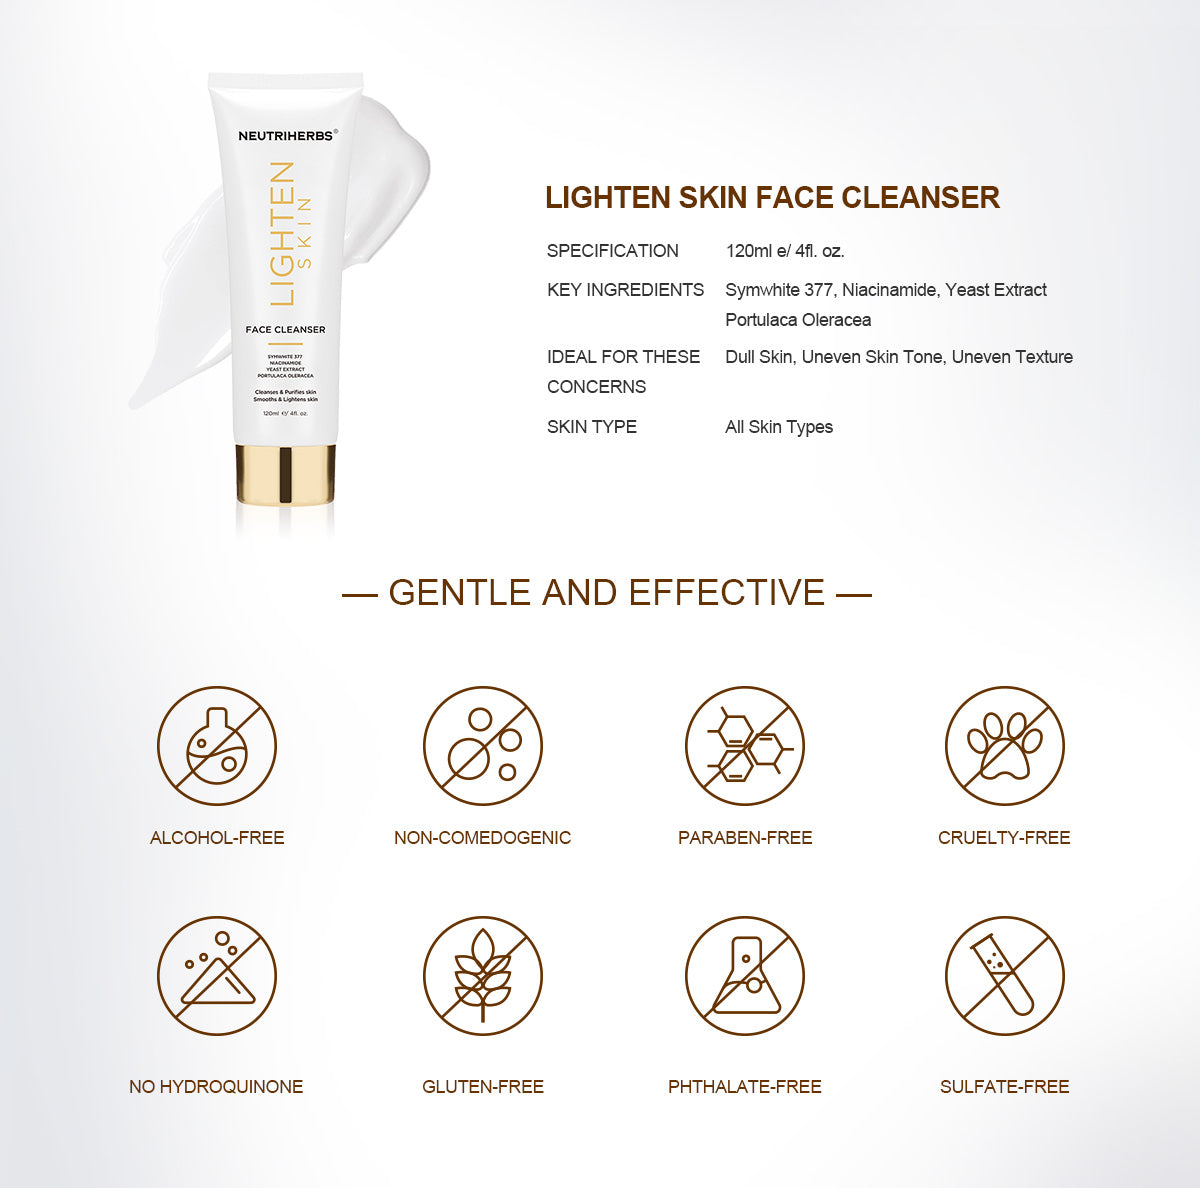 Wholesale & Private Label Lightening and Brightening Skin Whitening Face Cleanser For Dark Skin